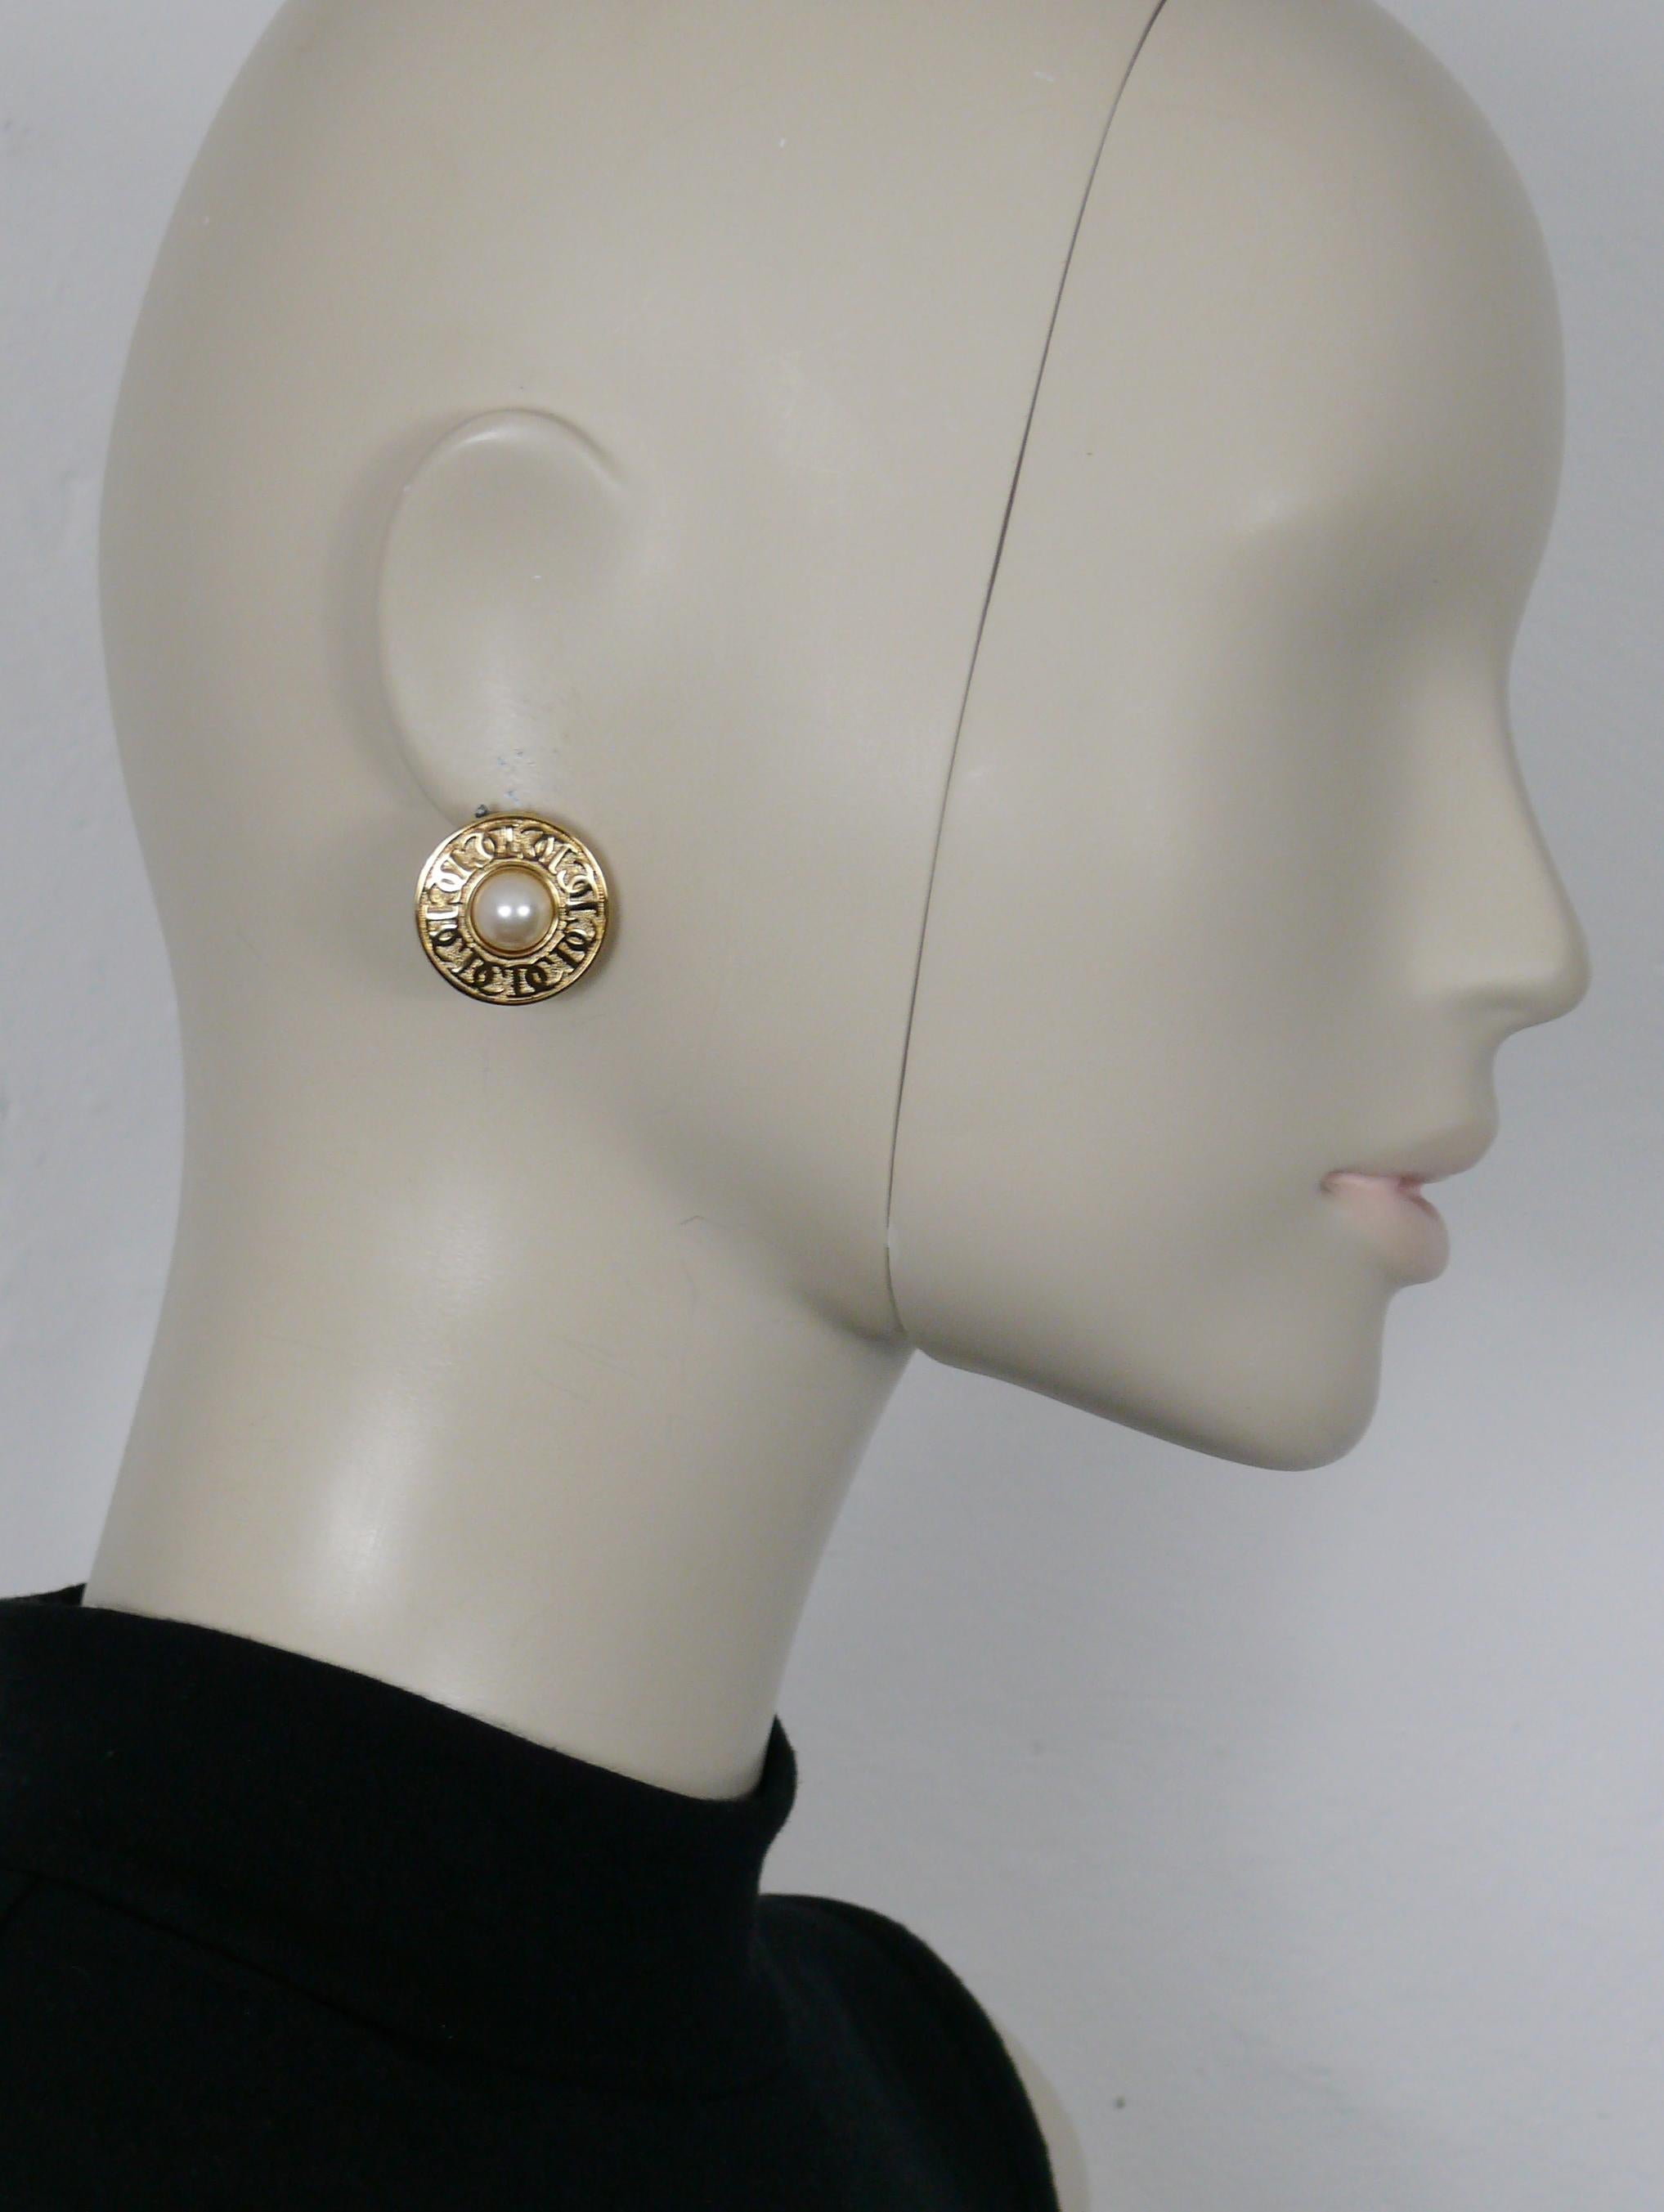 CHRISTIAN DIOR vintage gold toned clip-on earrings embossed with CD logos and embellished with a faux pearl at the center.

Embossed CHR. DIOR © Germany.

Indicative measurements : diameter approx. 2.2 cm (0.87 inch).

Weight per earring : approx. 9